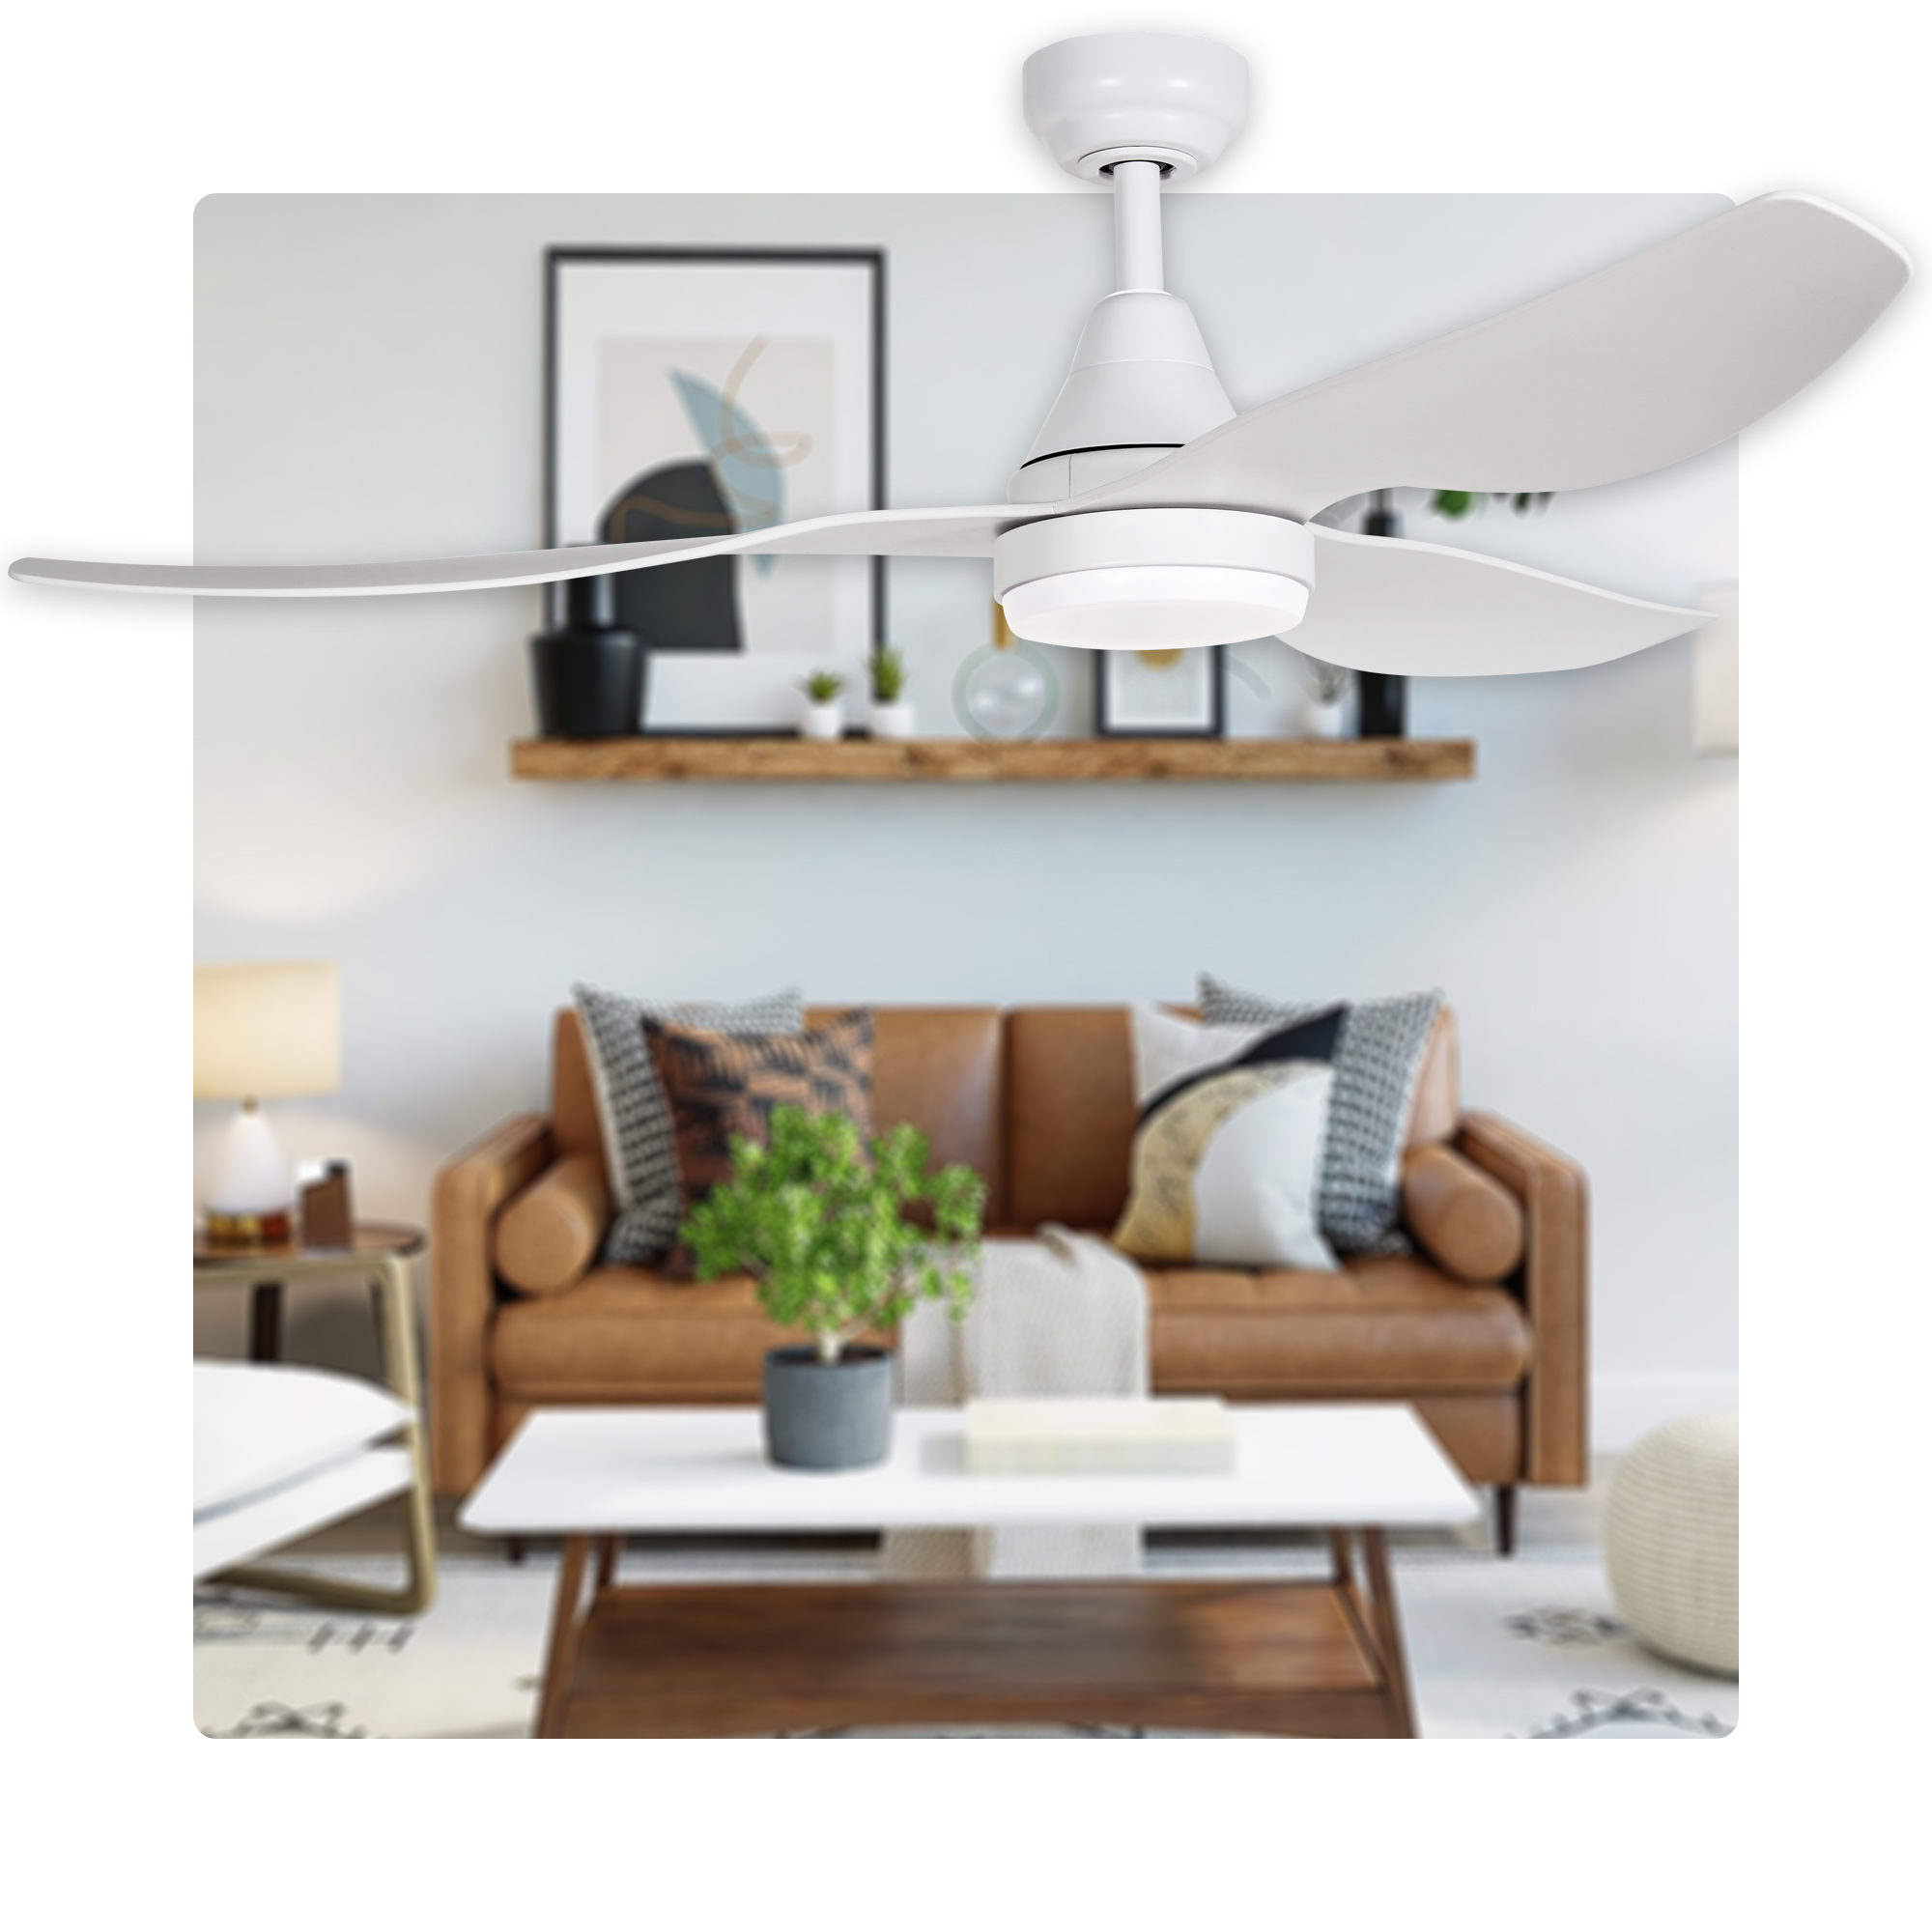 Simplicity DC Ceiling Fan with 18W LED Light Kit